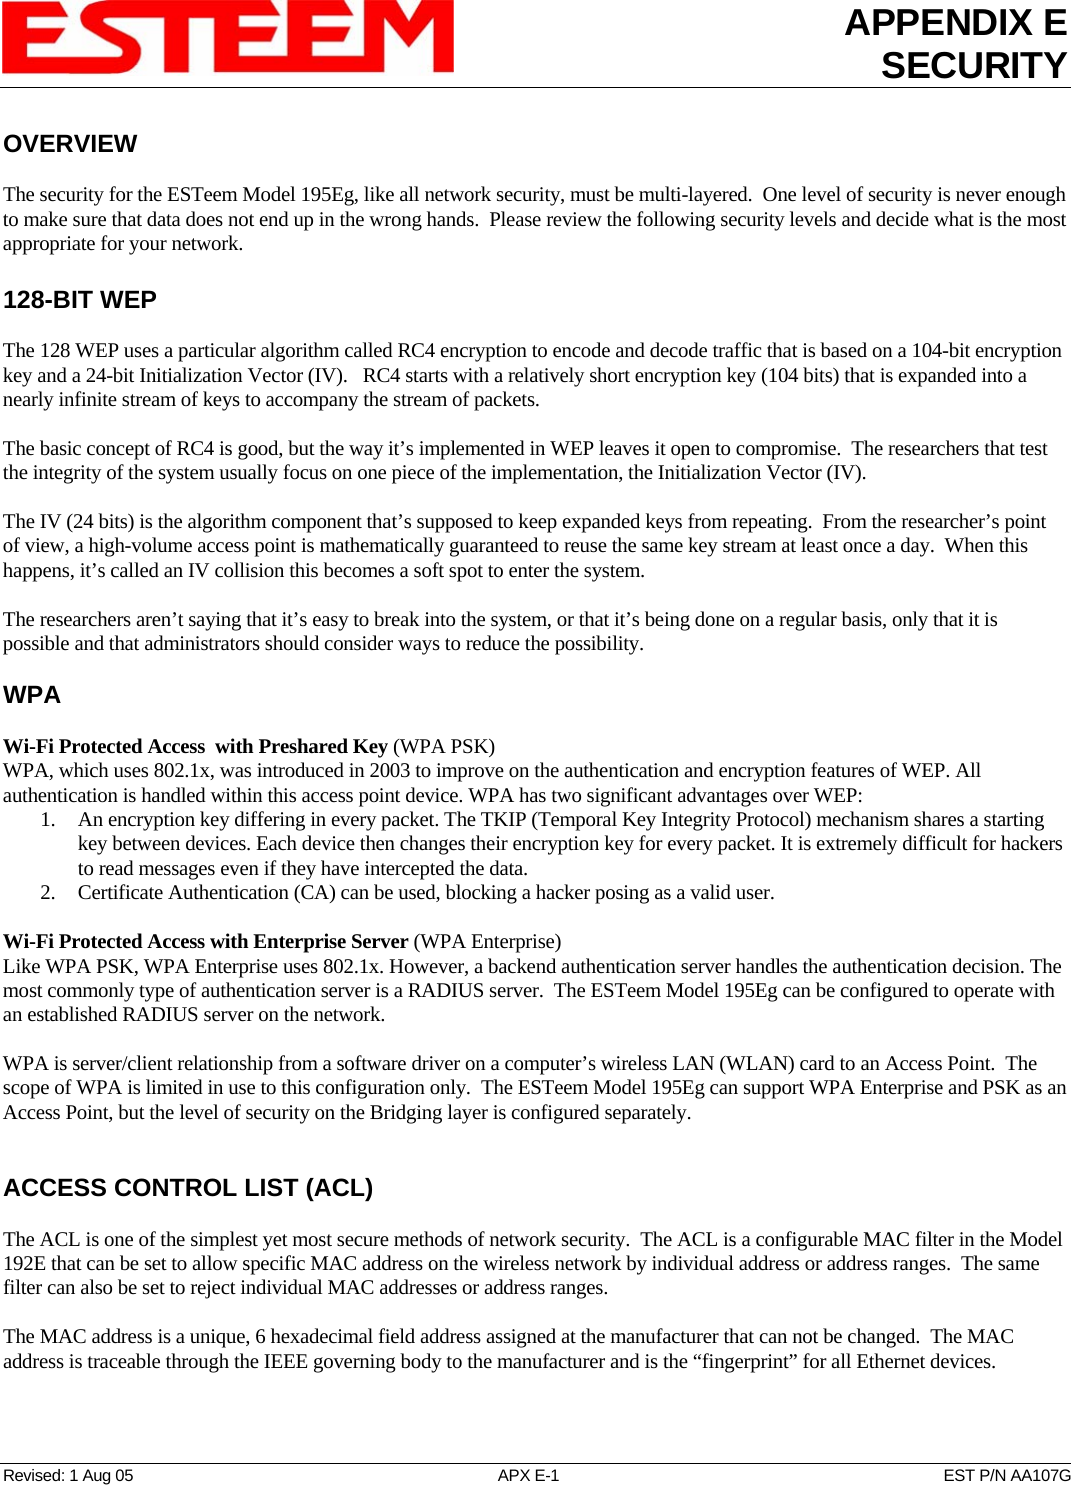 APPENDIX E SECURITY   Revised: 1 Aug 05  APX E-1  EST P/N AA107G OVERVIEW  The security for the ESTeem Model 195Eg, like all network security, must be multi-layered.  One level of security is never enough to make sure that data does not end up in the wrong hands.  Please review the following security levels and decide what is the most appropriate for your network.  128-BIT WEP  The 128 WEP uses a particular algorithm called RC4 encryption to encode and decode traffic that is based on a 104-bit encryption key and a 24-bit Initialization Vector (IV).   RC4 starts with a relatively short encryption key (104 bits) that is expanded into a nearly infinite stream of keys to accompany the stream of packets.   The basic concept of RC4 is good, but the way it’s implemented in WEP leaves it open to compromise.  The researchers that test the integrity of the system usually focus on one piece of the implementation, the Initialization Vector (IV).    The IV (24 bits) is the algorithm component that’s supposed to keep expanded keys from repeating.  From the researcher’s point of view, a high-volume access point is mathematically guaranteed to reuse the same key stream at least once a day.  When this happens, it’s called an IV collision this becomes a soft spot to enter the system.    The researchers aren’t saying that it’s easy to break into the system, or that it’s being done on a regular basis, only that it is possible and that administrators should consider ways to reduce the possibility.   WPA  Wi-Fi Protected Access  with Preshared Key (WPA PSK) WPA, which uses 802.1x, was introduced in 2003 to improve on the authentication and encryption features of WEP. All authentication is handled within this access point device. WPA has two significant advantages over WEP:  1.  An encryption key differing in every packet. The TKIP (Temporal Key Integrity Protocol) mechanism shares a starting key between devices. Each device then changes their encryption key for every packet. It is extremely difficult for hackers to read messages even if they have intercepted the data.  2.  Certificate Authentication (CA) can be used, blocking a hacker posing as a valid user.   Wi-Fi Protected Access with Enterprise Server (WPA Enterprise) Like WPA PSK, WPA Enterprise uses 802.1x. However, a backend authentication server handles the authentication decision. The most commonly type of authentication server is a RADIUS server.  The ESTeem Model 195Eg can be configured to operate with an established RADIUS server on the network.  WPA is server/client relationship from a software driver on a computer’s wireless LAN (WLAN) card to an Access Point.  The scope of WPA is limited in use to this configuration only.  The ESTeem Model 195Eg can support WPA Enterprise and PSK as an Access Point, but the level of security on the Bridging layer is configured separately.   ACCESS CONTROL LIST (ACL)  The ACL is one of the simplest yet most secure methods of network security.  The ACL is a configurable MAC filter in the Model 192E that can be set to allow specific MAC address on the wireless network by individual address or address ranges.  The same filter can also be set to reject individual MAC addresses or address ranges.  The MAC address is a unique, 6 hexadecimal field address assigned at the manufacturer that can not be changed.  The MAC address is traceable through the IEEE governing body to the manufacturer and is the “fingerprint” for all Ethernet devices.  